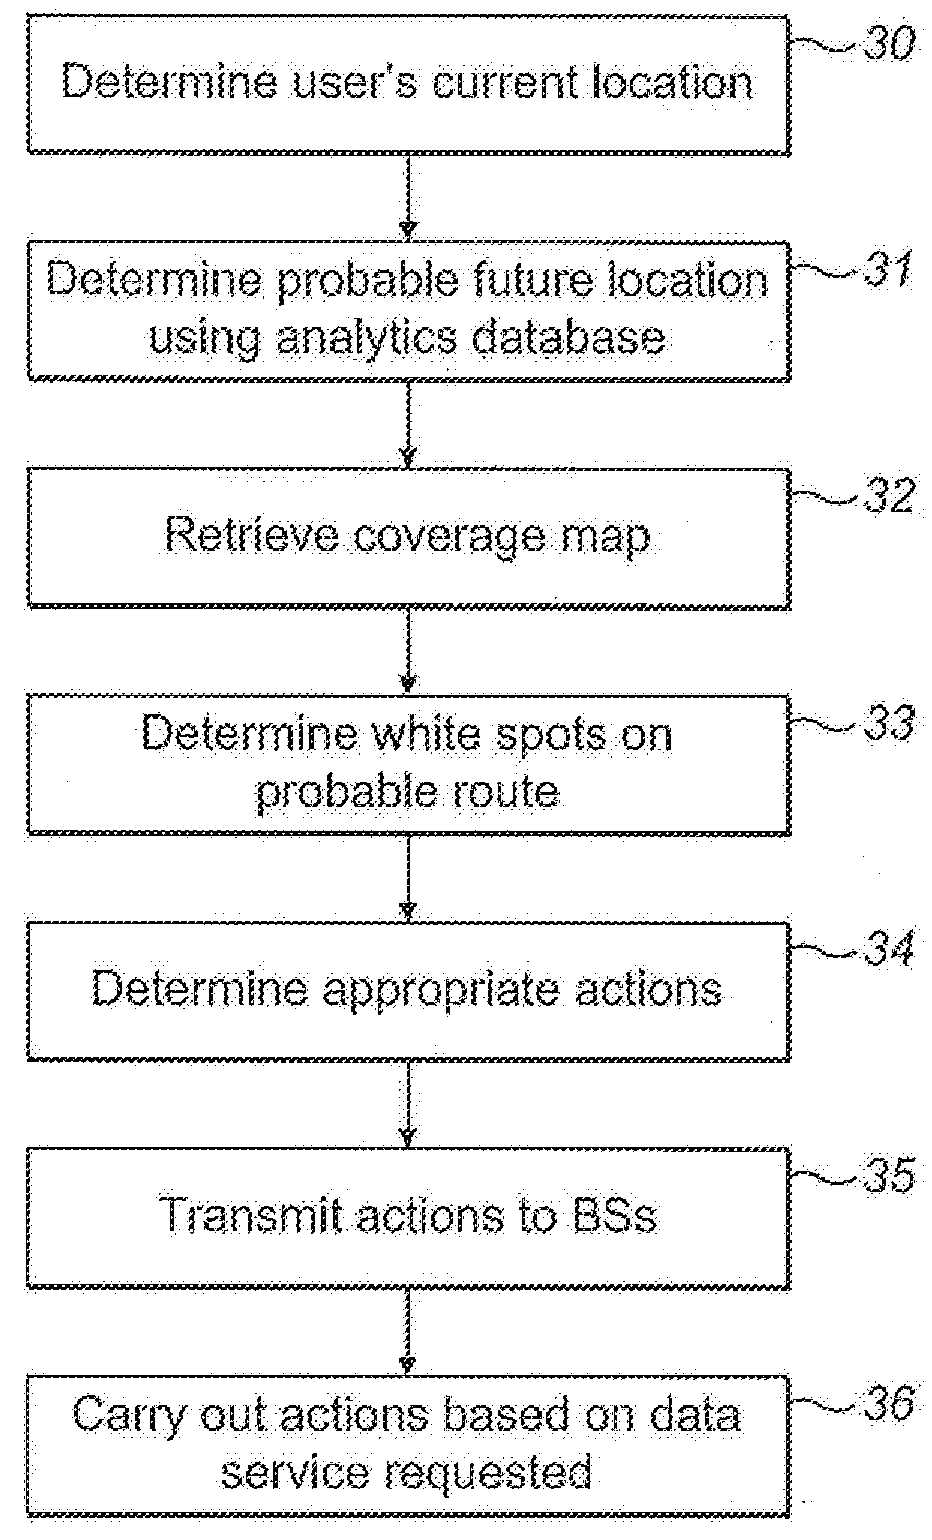 A method and system of providing data service according to a user's future location